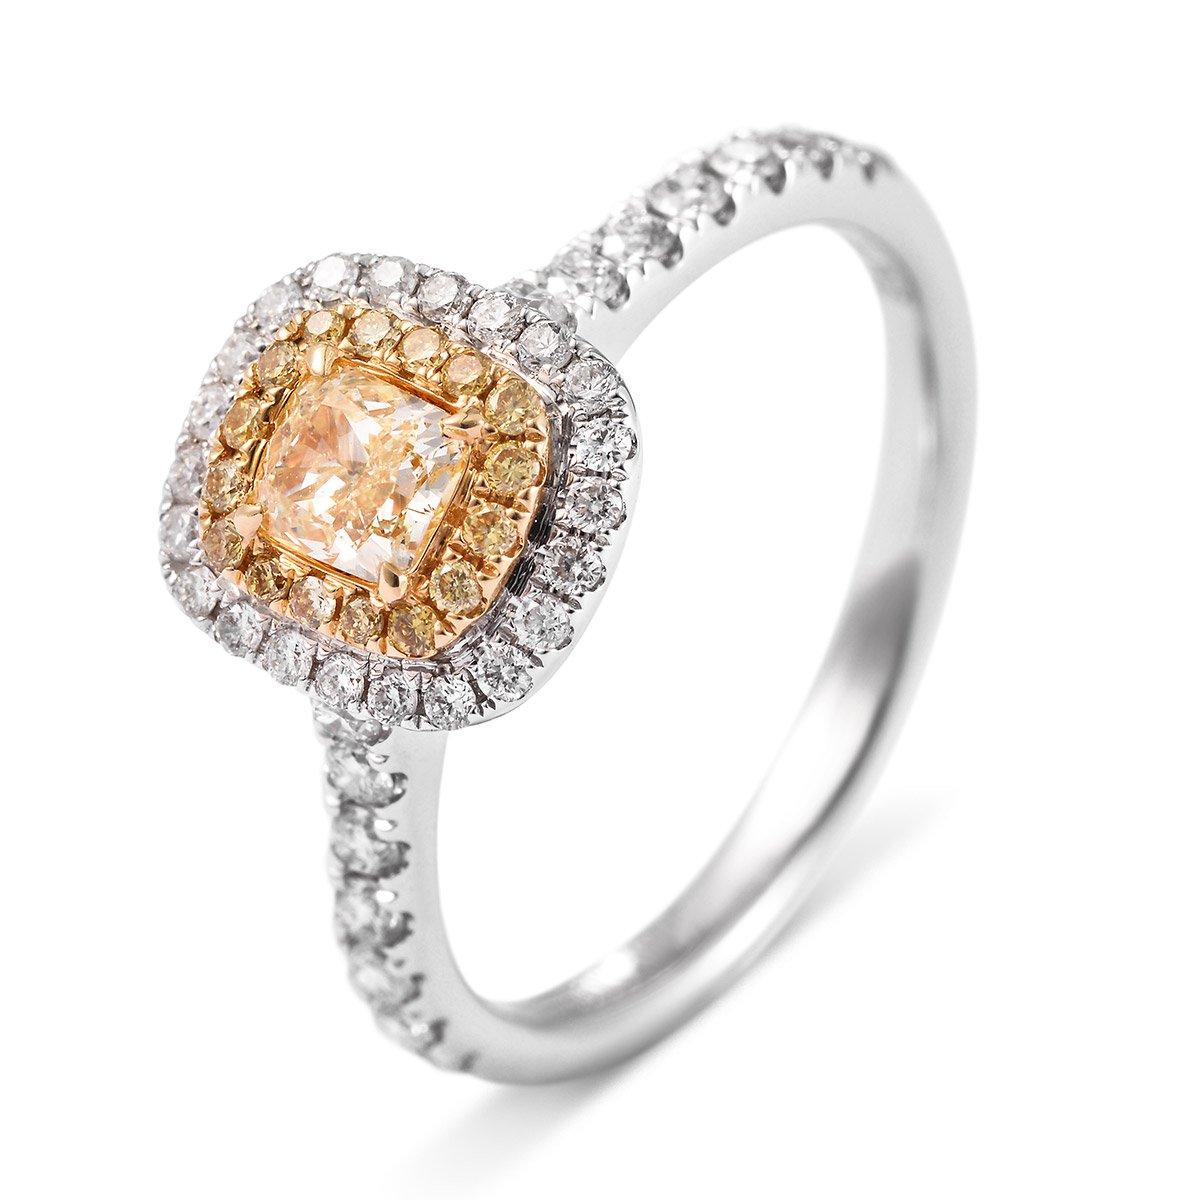 Natural Fancy yellow Diamond surrounded by a double halo of white and yellow diamonds making up a total of 0.70 carats. Expertly crafted using 18 Karat white gold. 
The Yellow Diamonds in fact take the credit for making fancy diamonds very popular